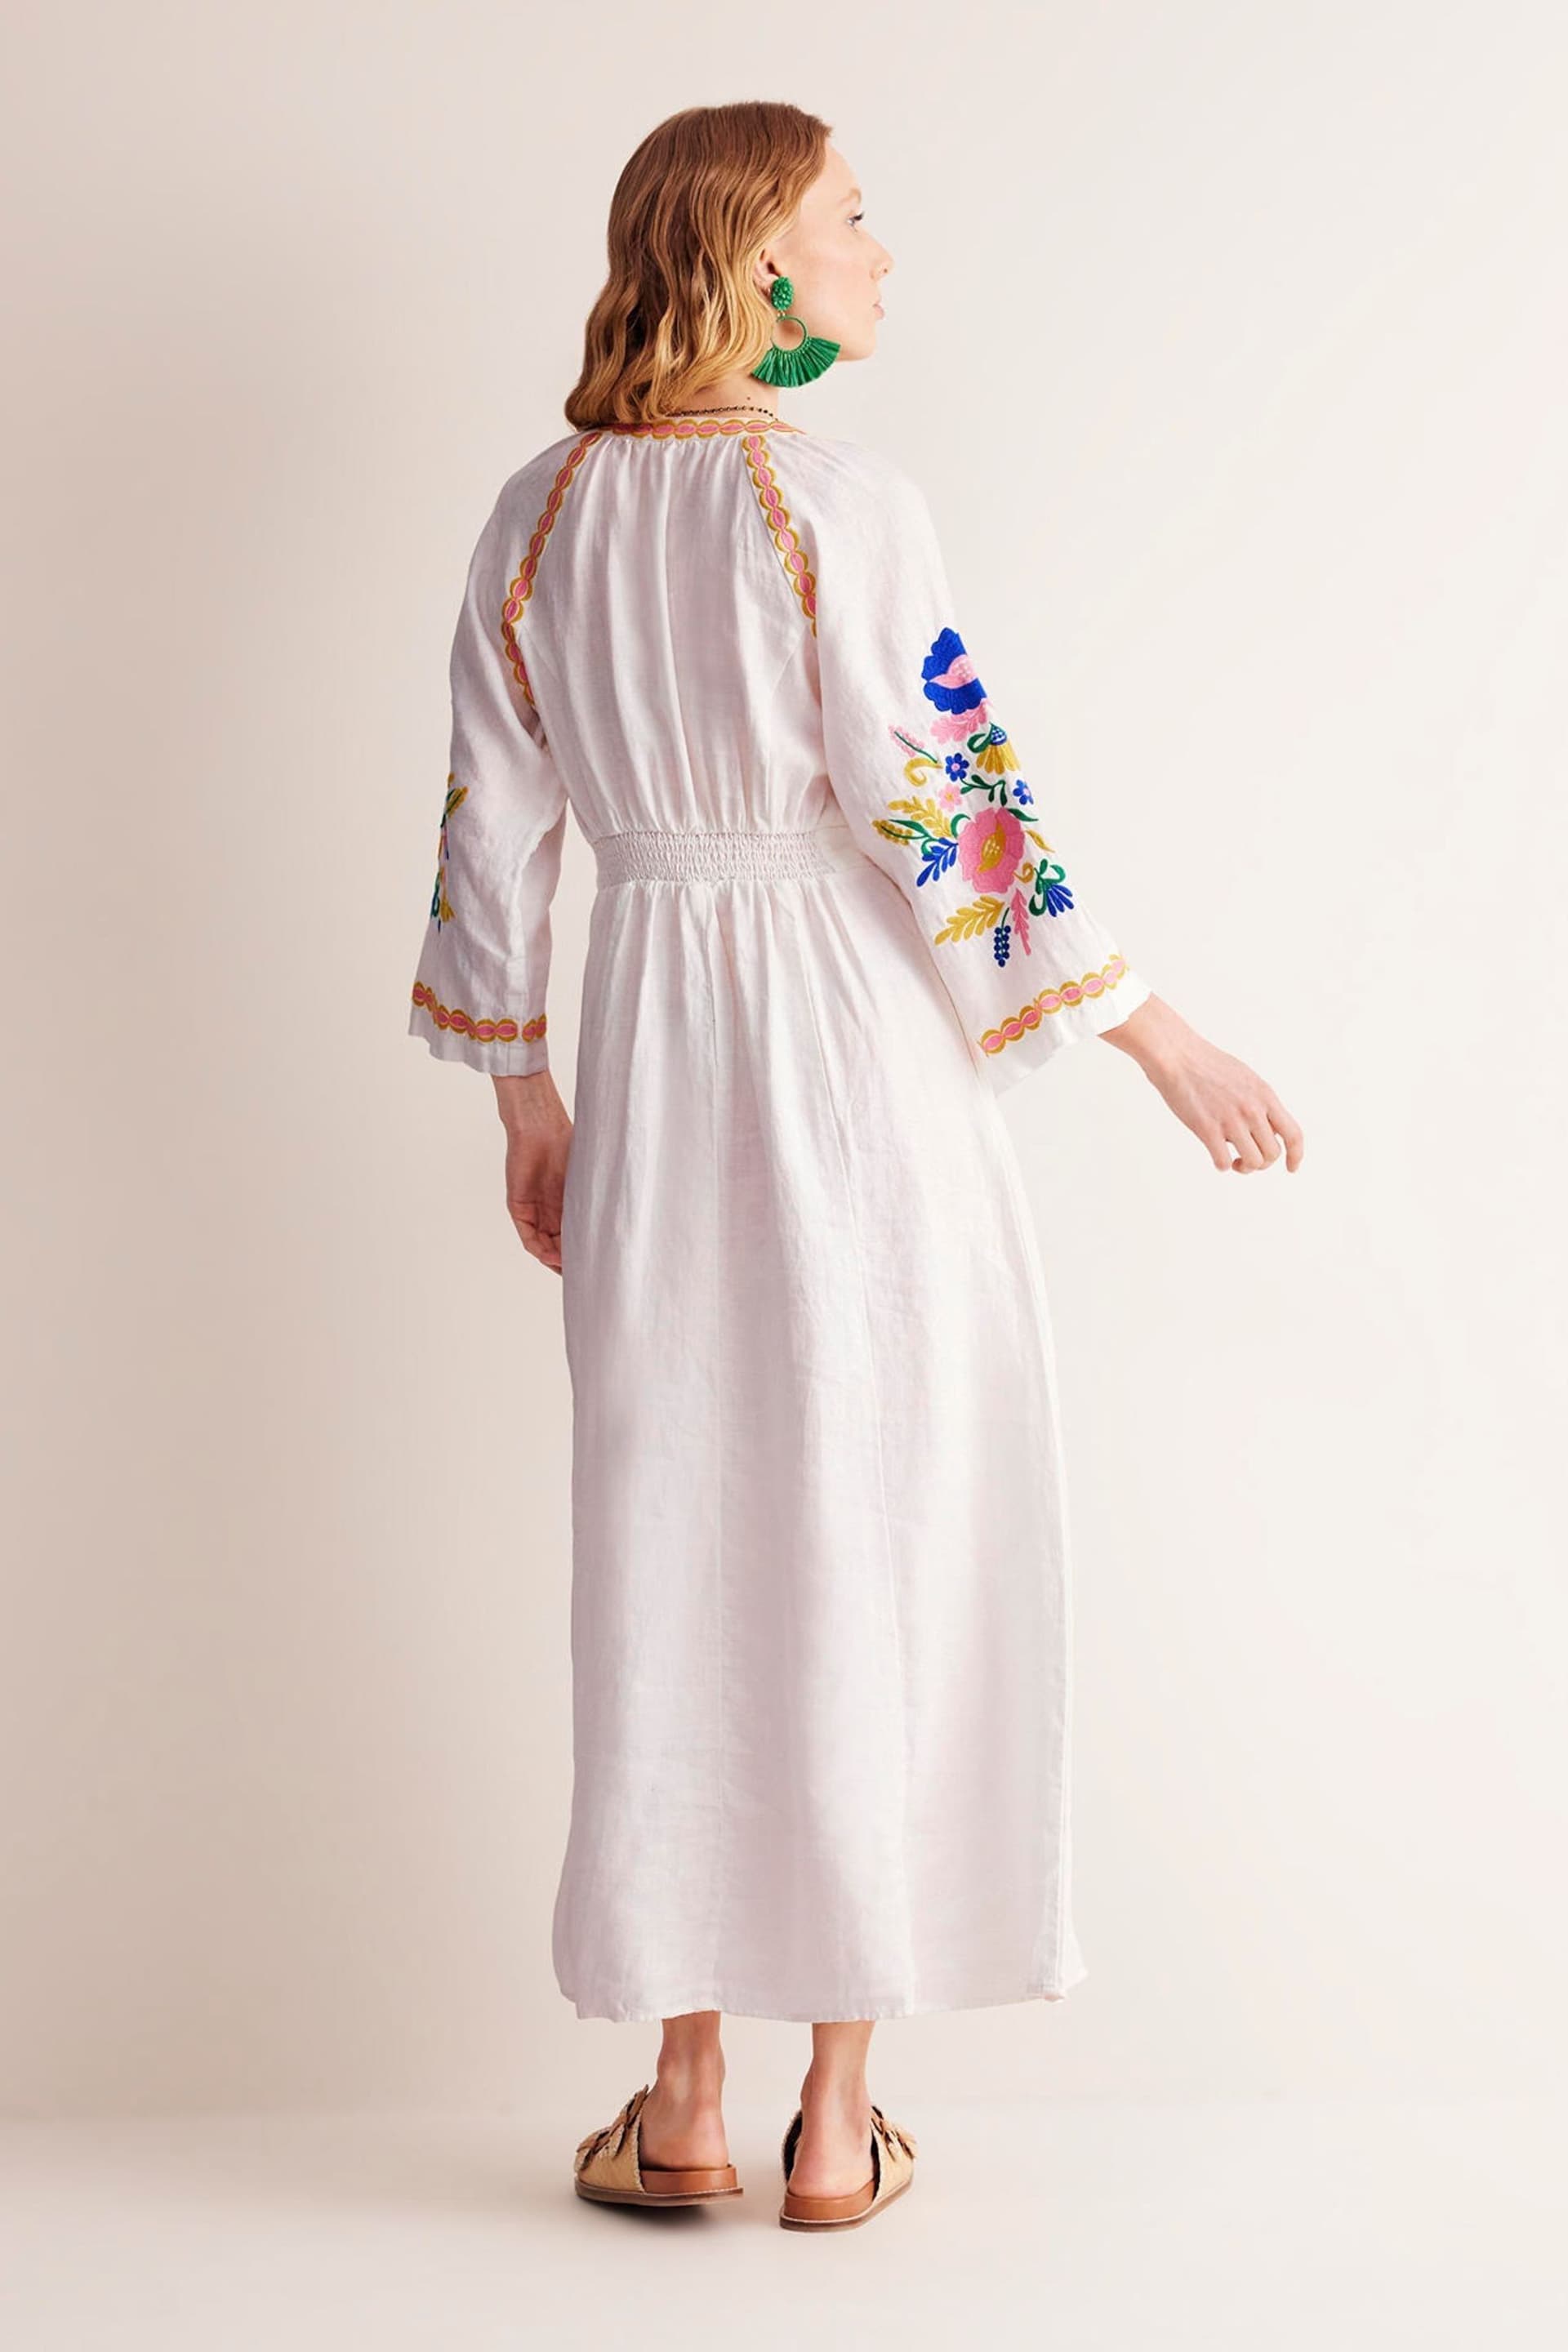 Boden White Petite Una Linen Embroidered Dress - Image 3 of 6